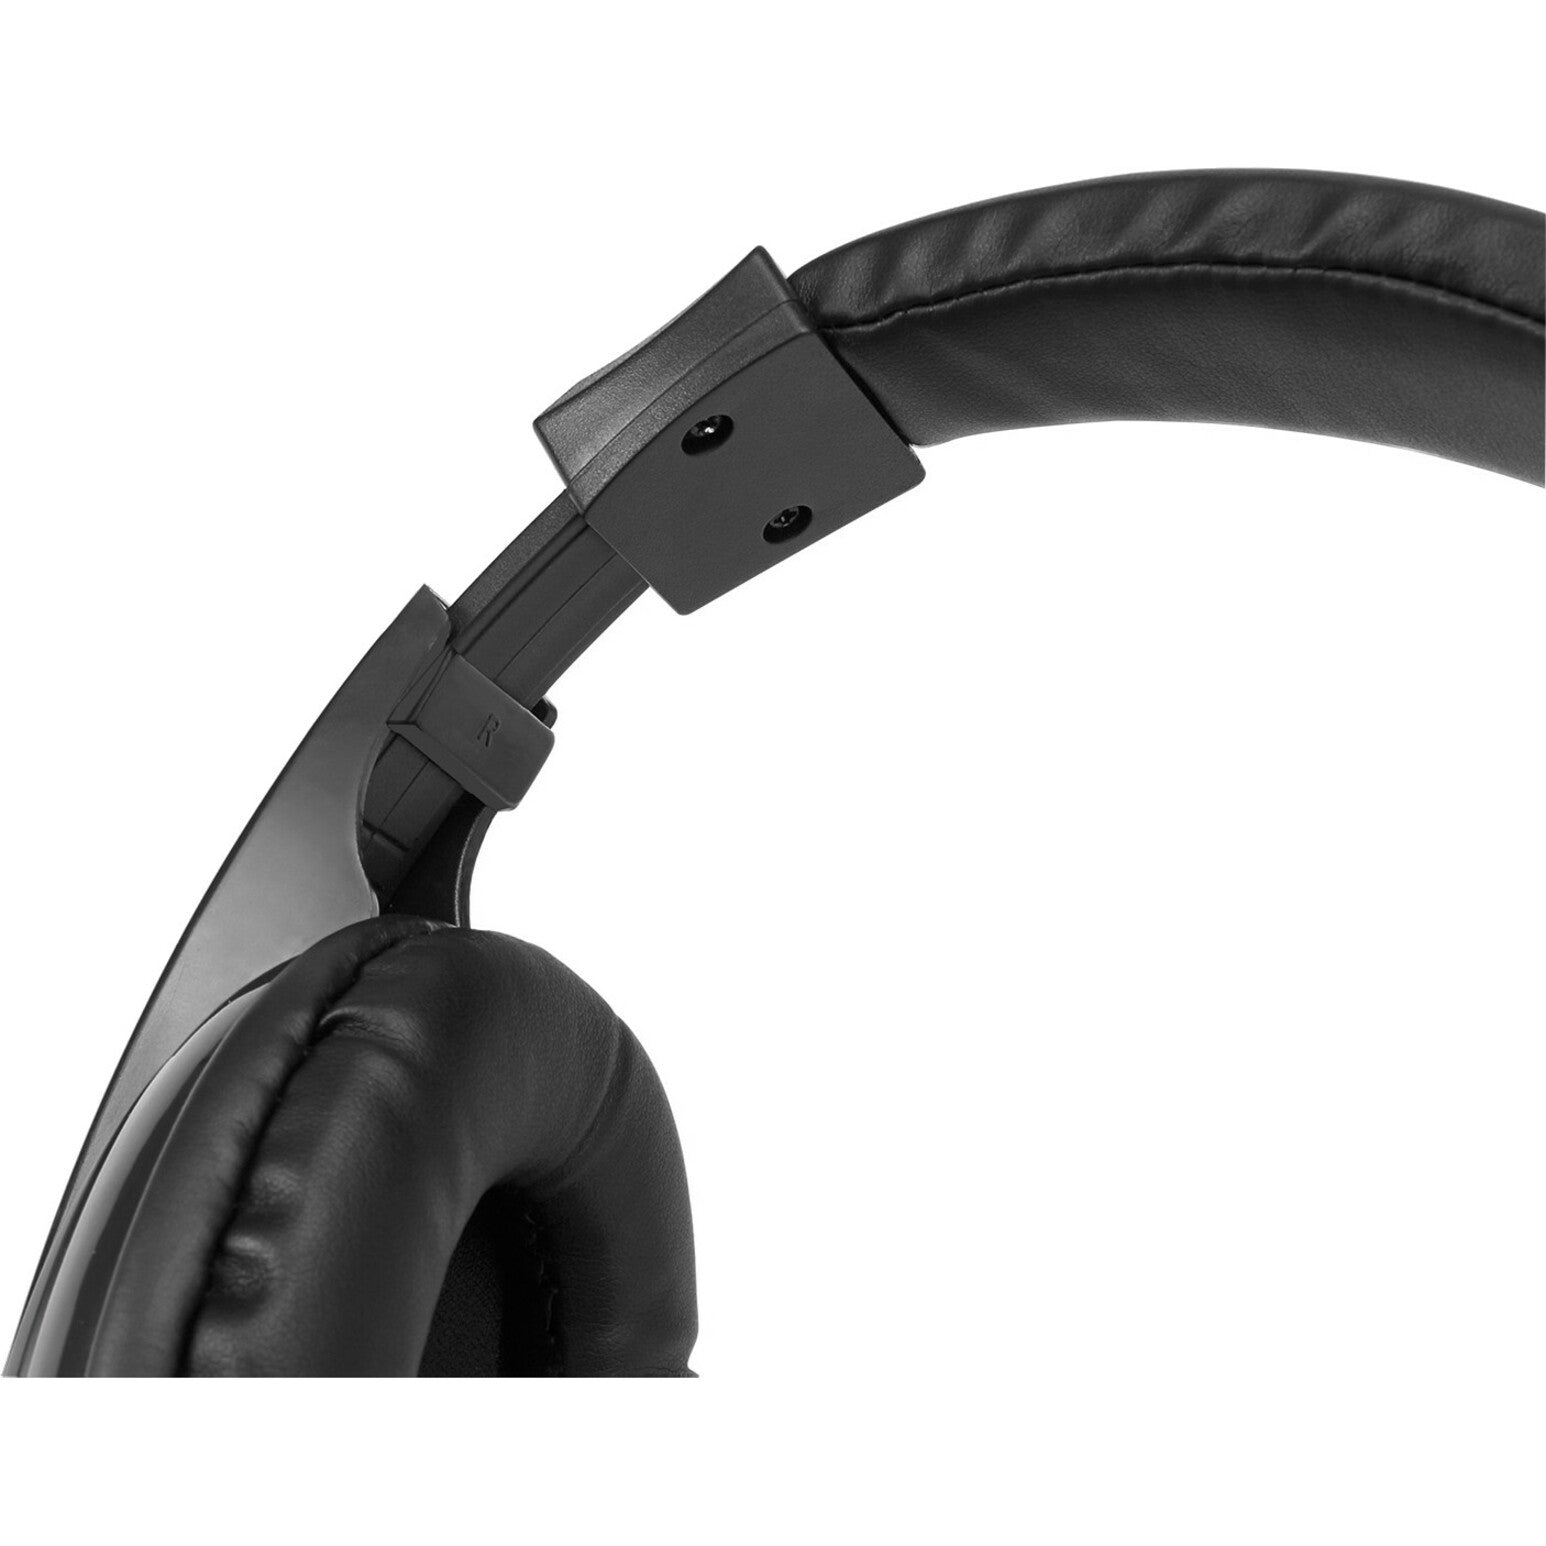 Adesso XTREAM H5 Multimedia Headset with Microphone, Comfortable, Inline Volume Control, Adjustable Headband, Black